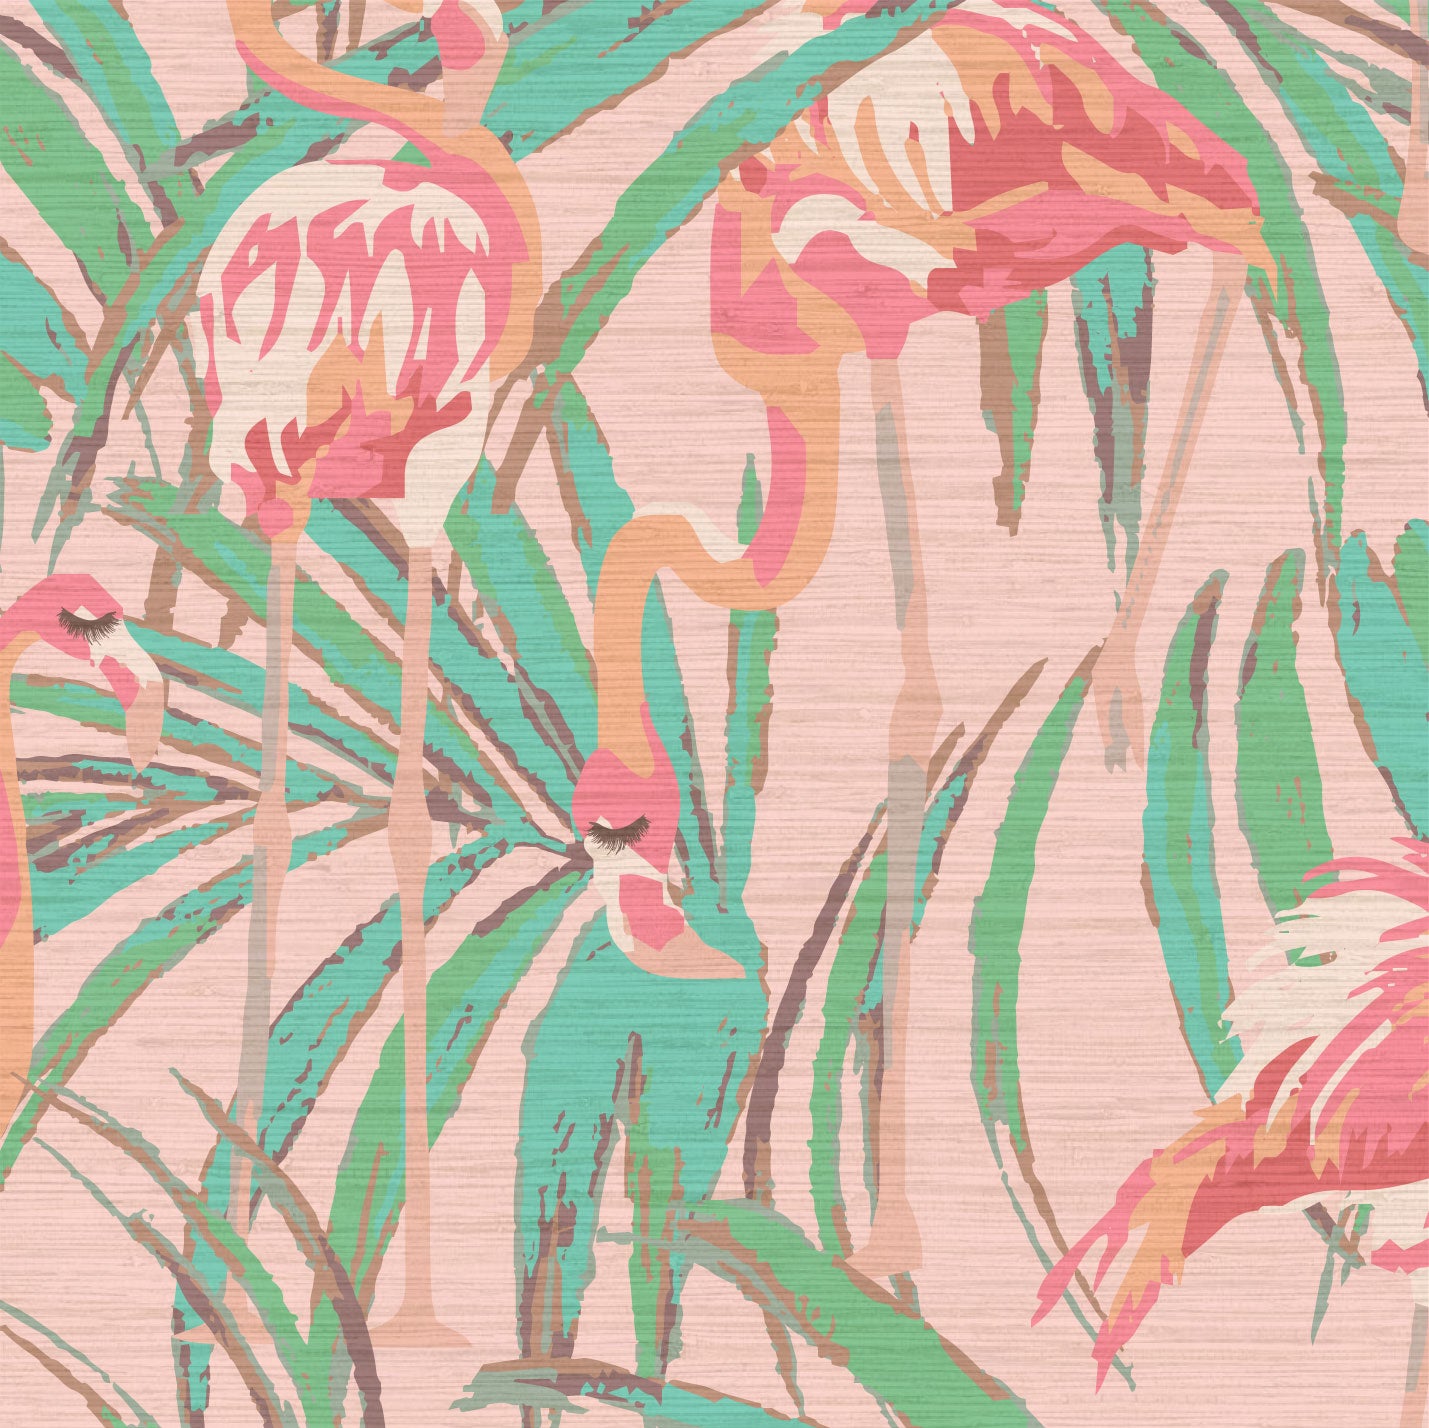 light pink printed grasscloth wallpaper with oversized palm leaves layered with extra large flamingos in shades of pink luscious eyelashes brow beauty bar medspa salon Grasscloth Natural Textured Eco-Friendly Non-toxic High-quality  Sustainable practices Sustainability Interior Design Wall covering Bold Wallpaper Custom Tailor-made Retro chic Tropical Beauty Hair Garden jungle Seaside Coastal Seashore Waterfront Vacation home styling Retreat Relaxed Beach cottage animal bird palm leaf tree